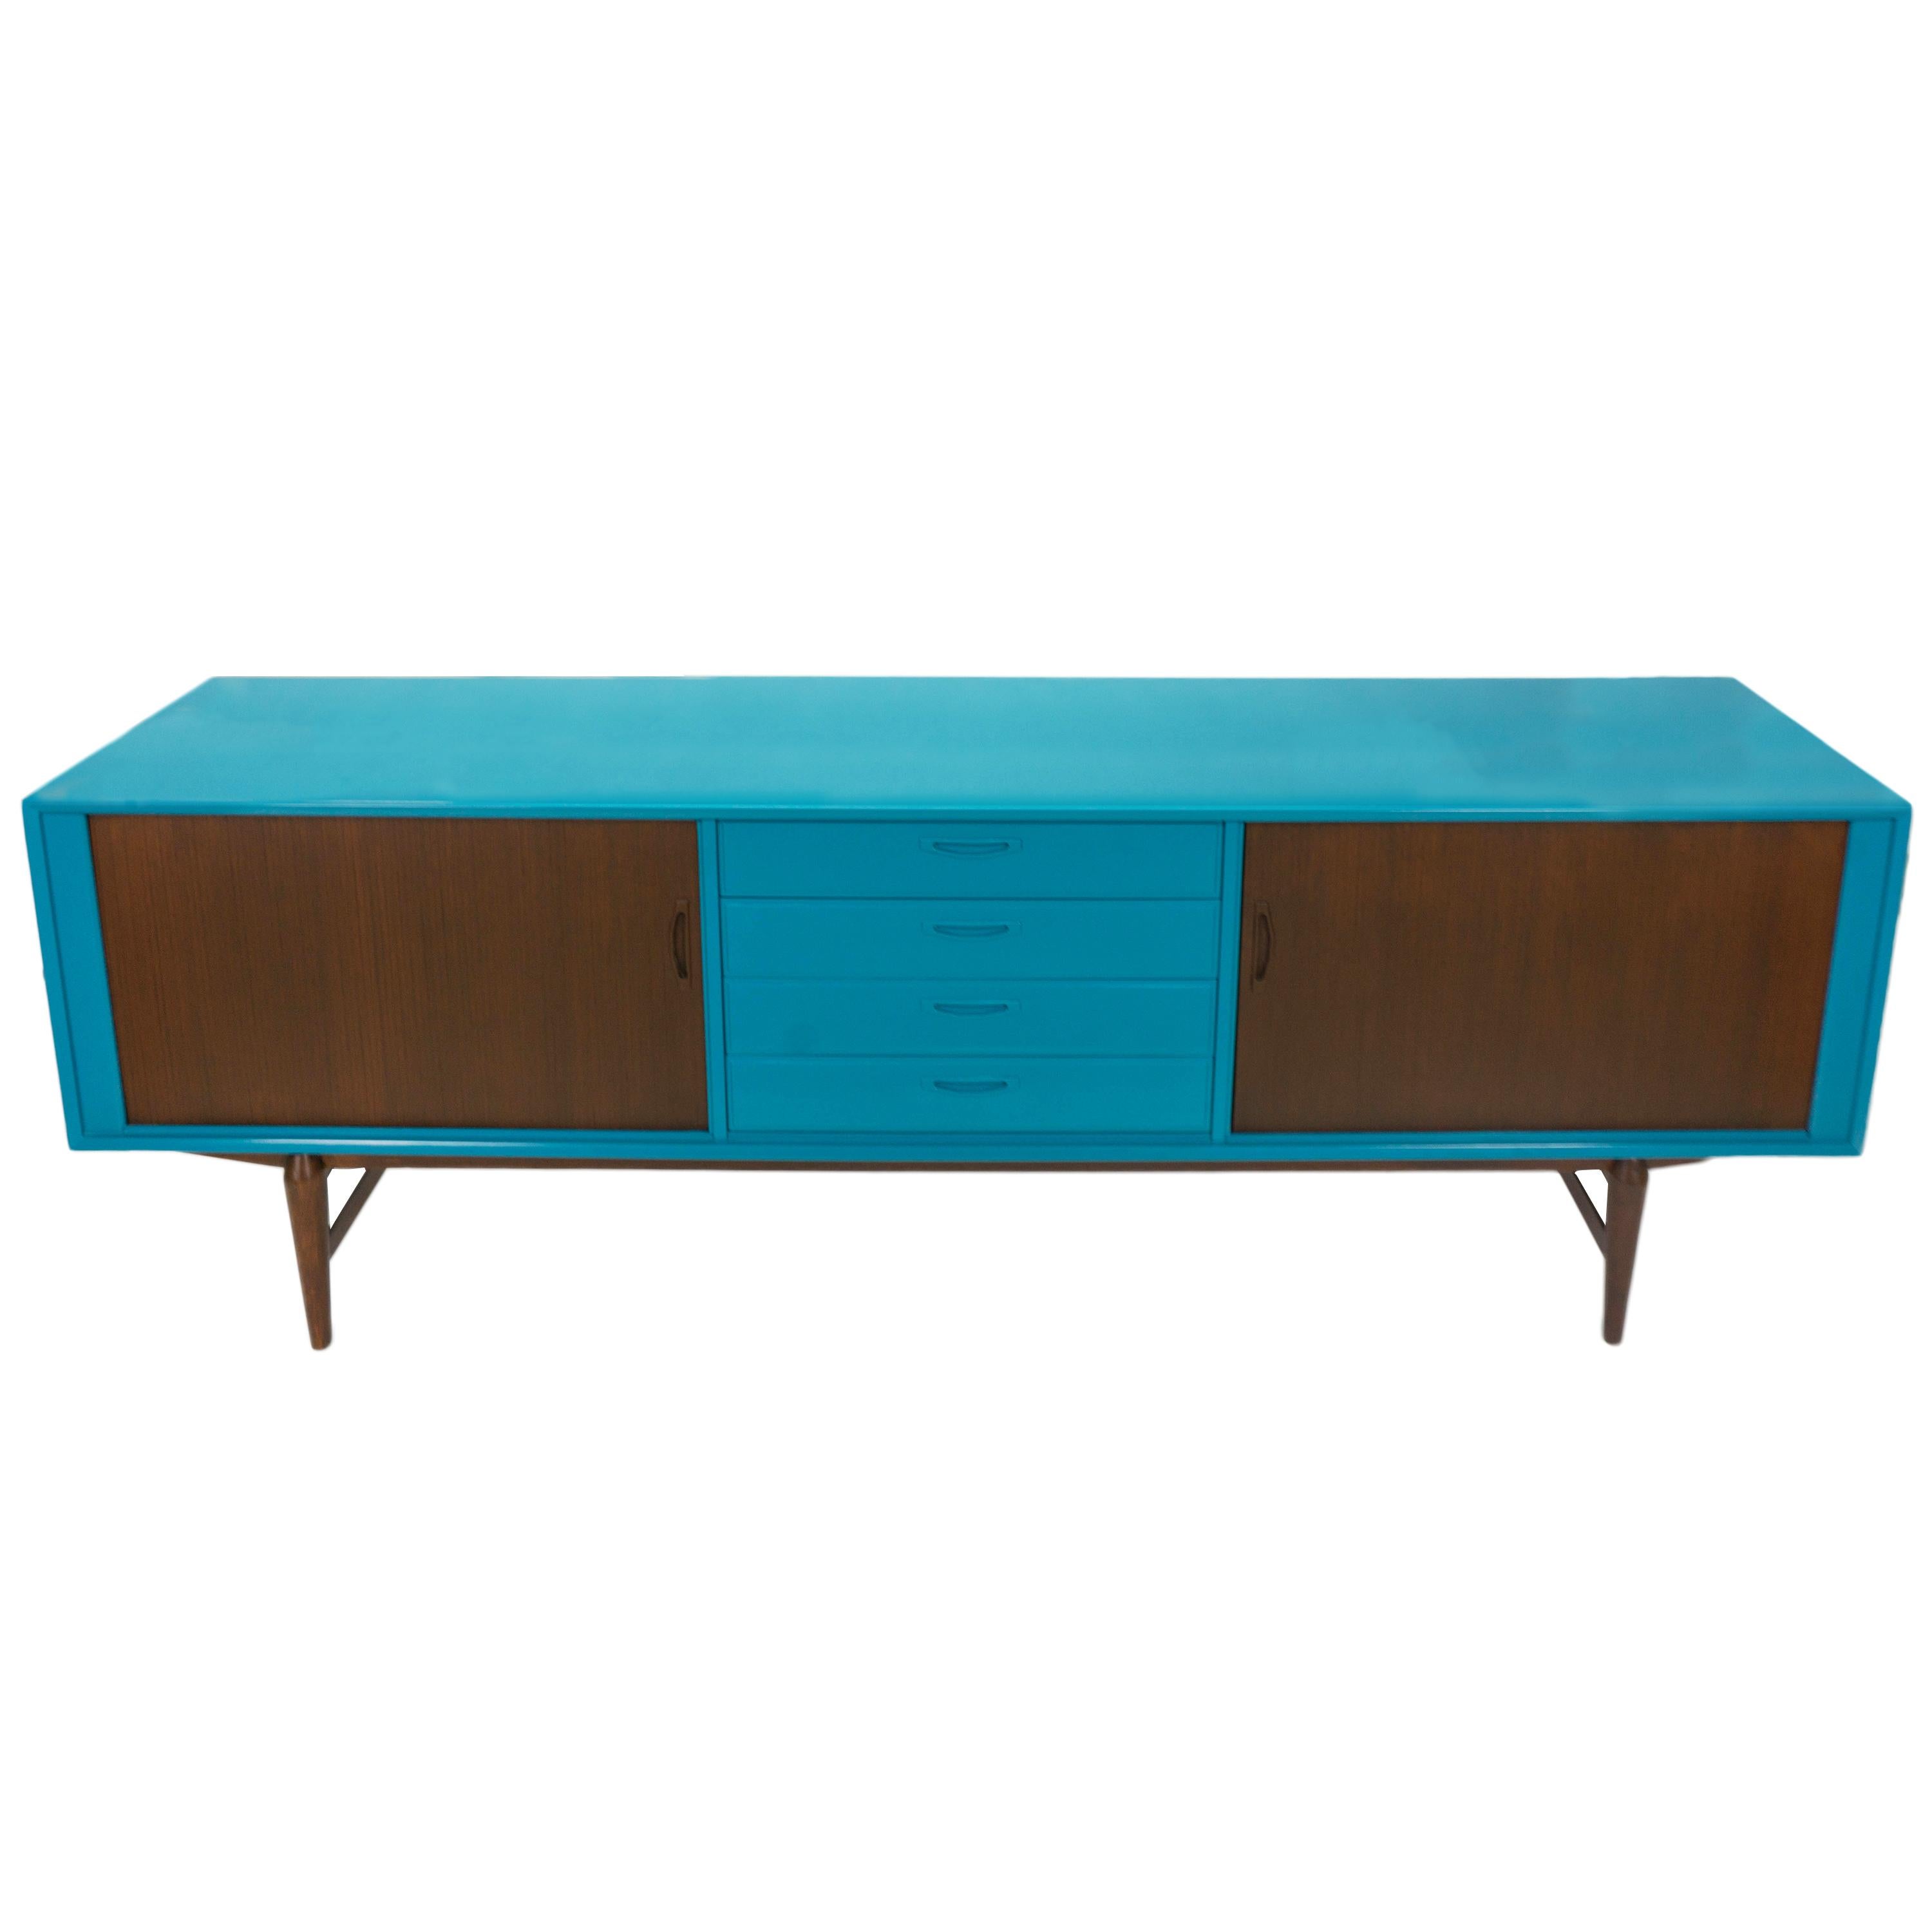 American Mid-Century Modern Sideboard with Drawers For Sale